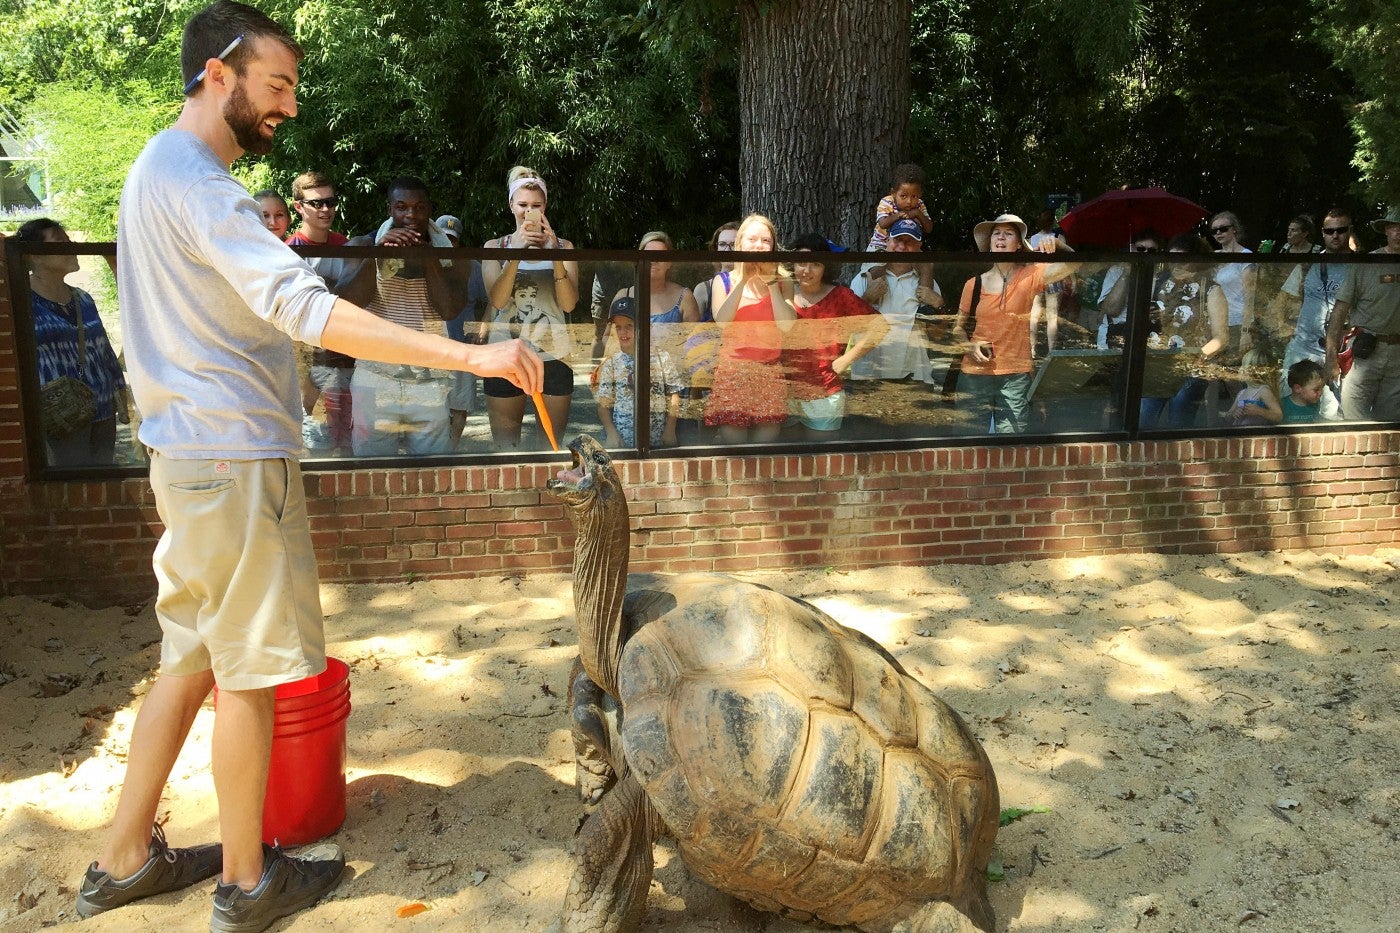 Keeper Matt Neff dangles a carrot above an Aldabra tortoise's mouth to demonstrate how they reach for food in the trees.